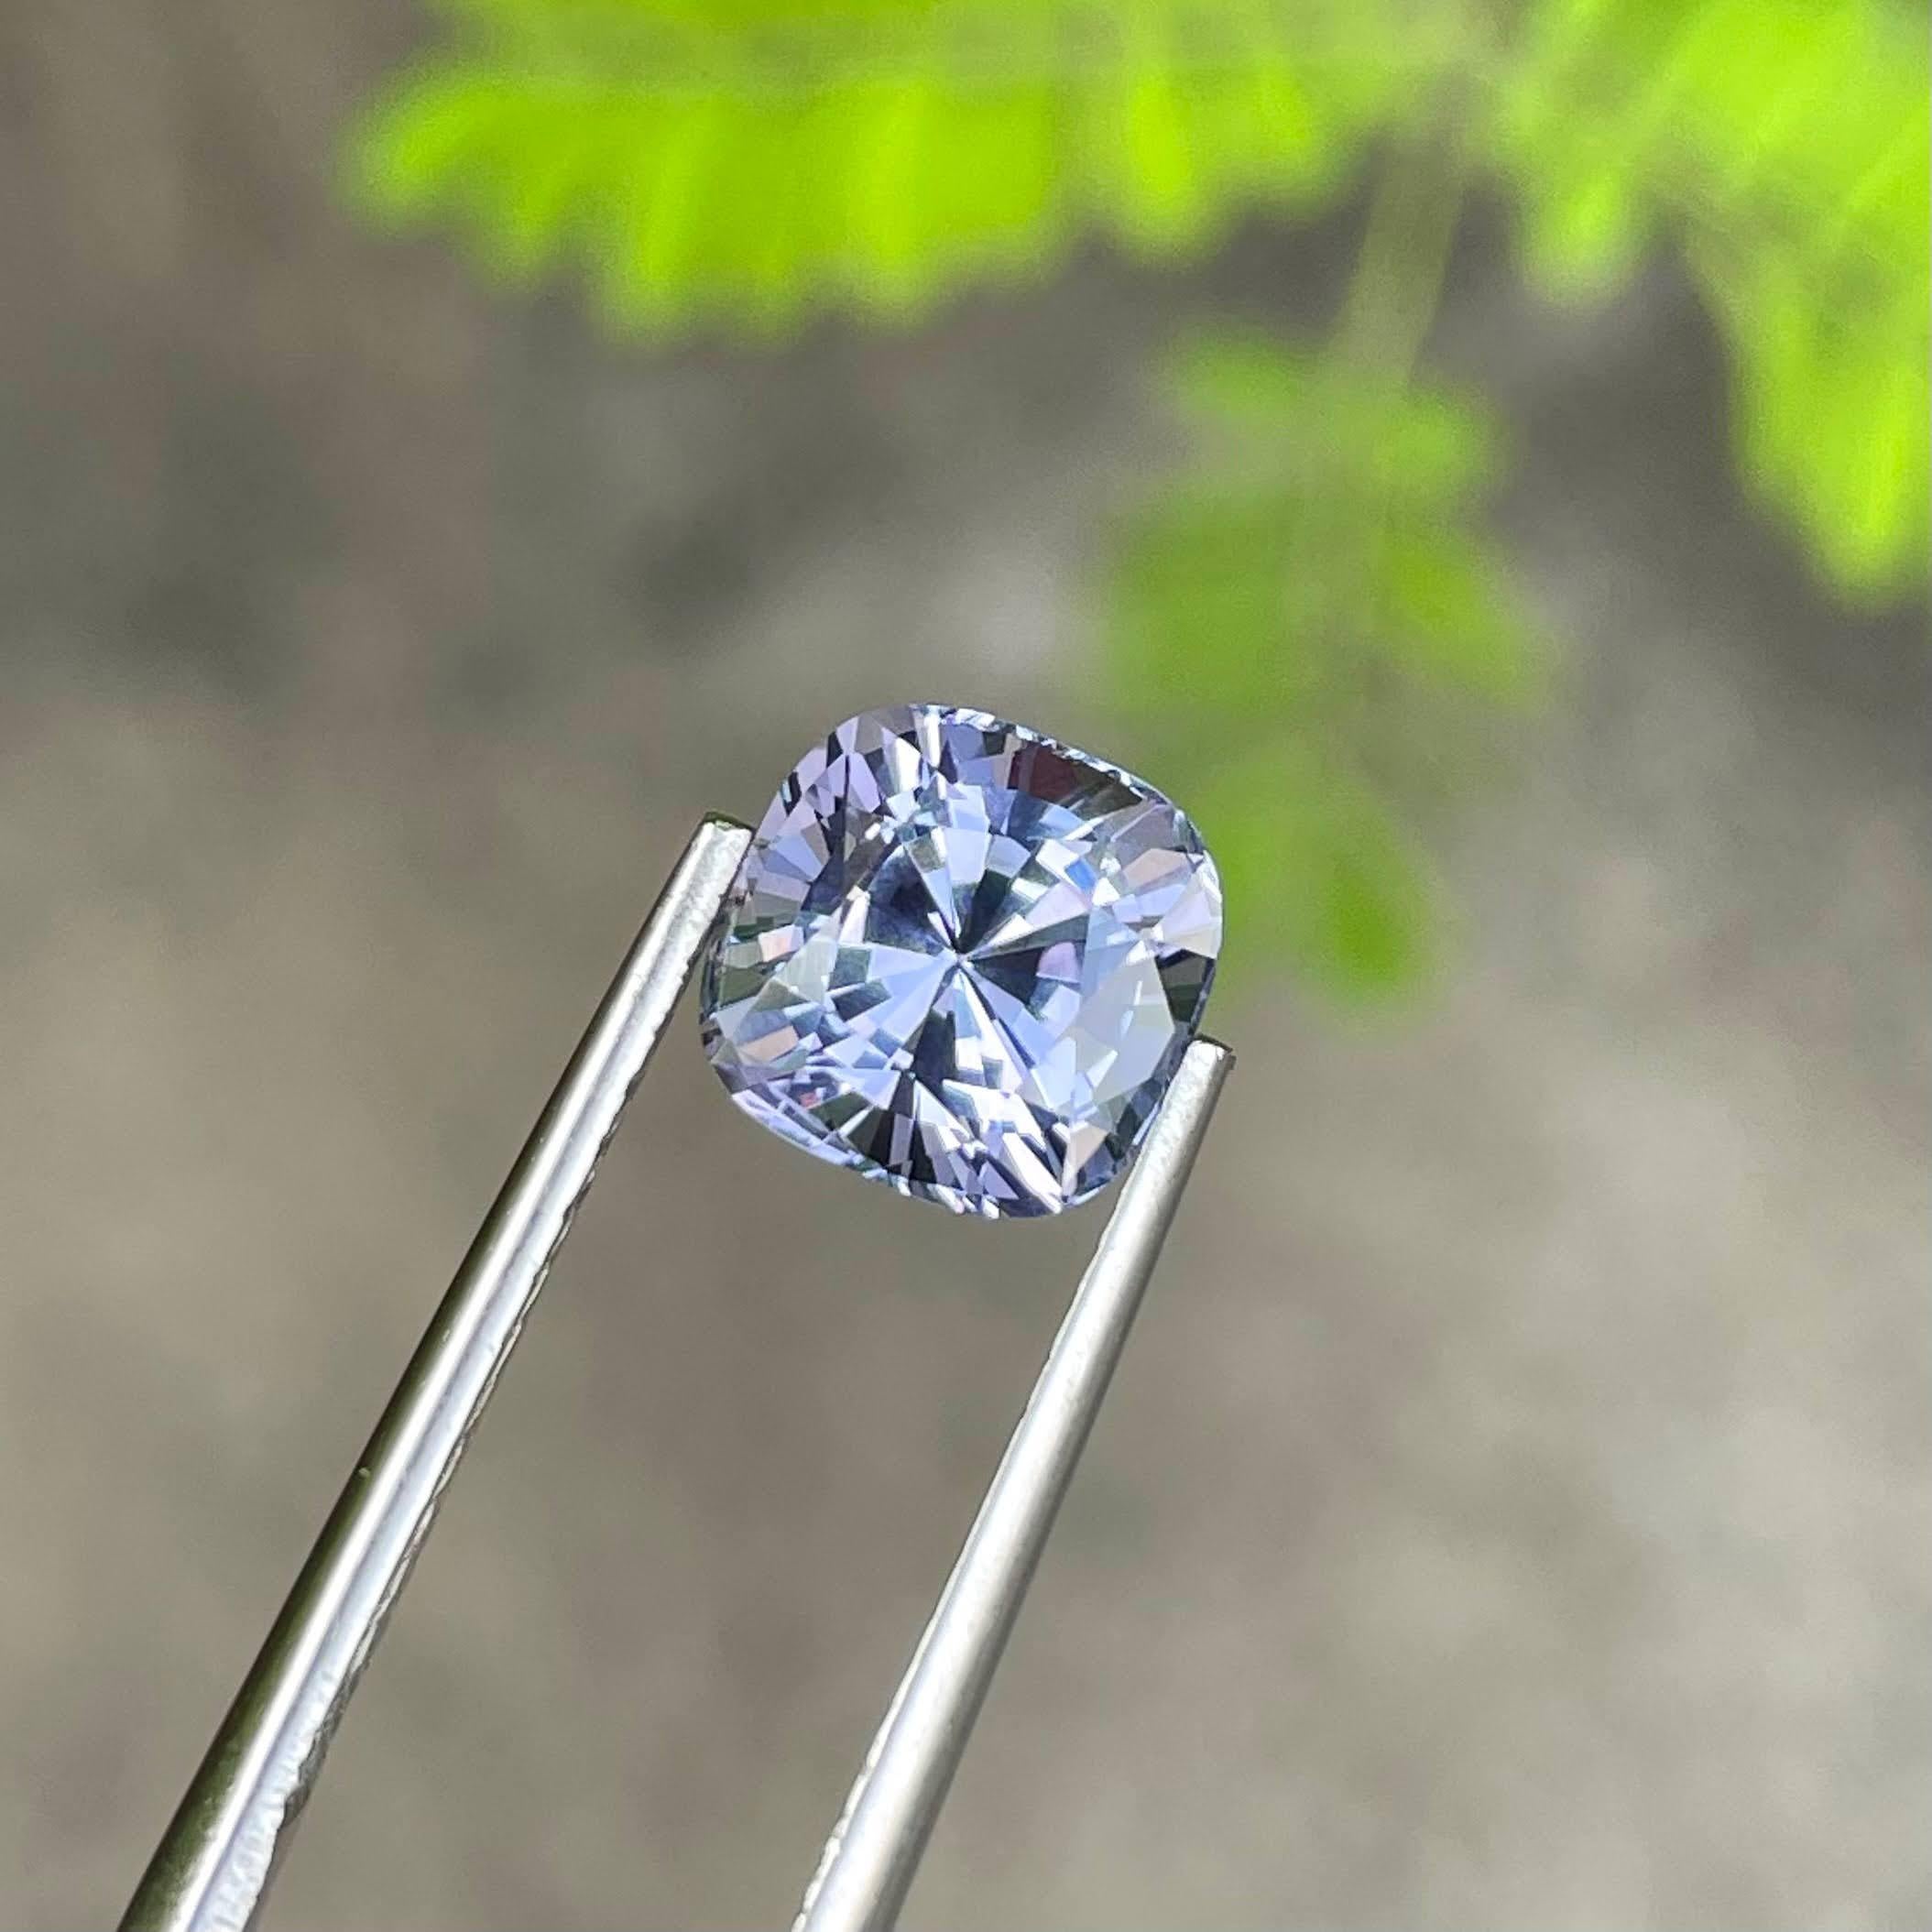 Weight 2.67 carats 
Dimensions 7.75x7.62x5.9 mm
Treatment none 
Origin Tanzania 
Clarity Loupe clean 
Shape cushion 
Cut fancy cushion 





The exquisite Lavender Spinel stone, boasting a weight of 2.67 carats, captivates with its Cushion Cut,